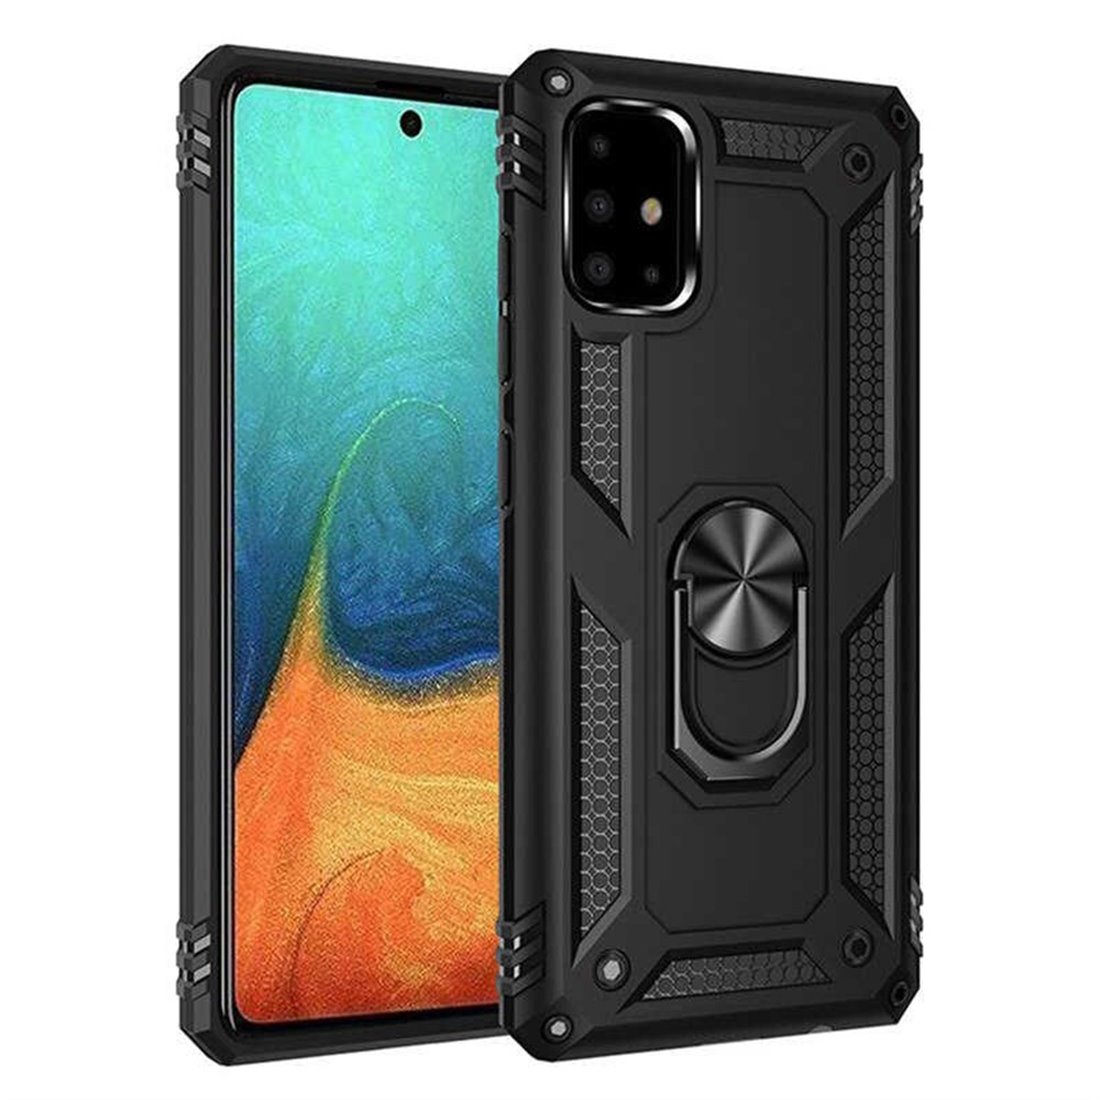 Samsung Galaxy A51 Plastic Black Back Cover - Solid ring